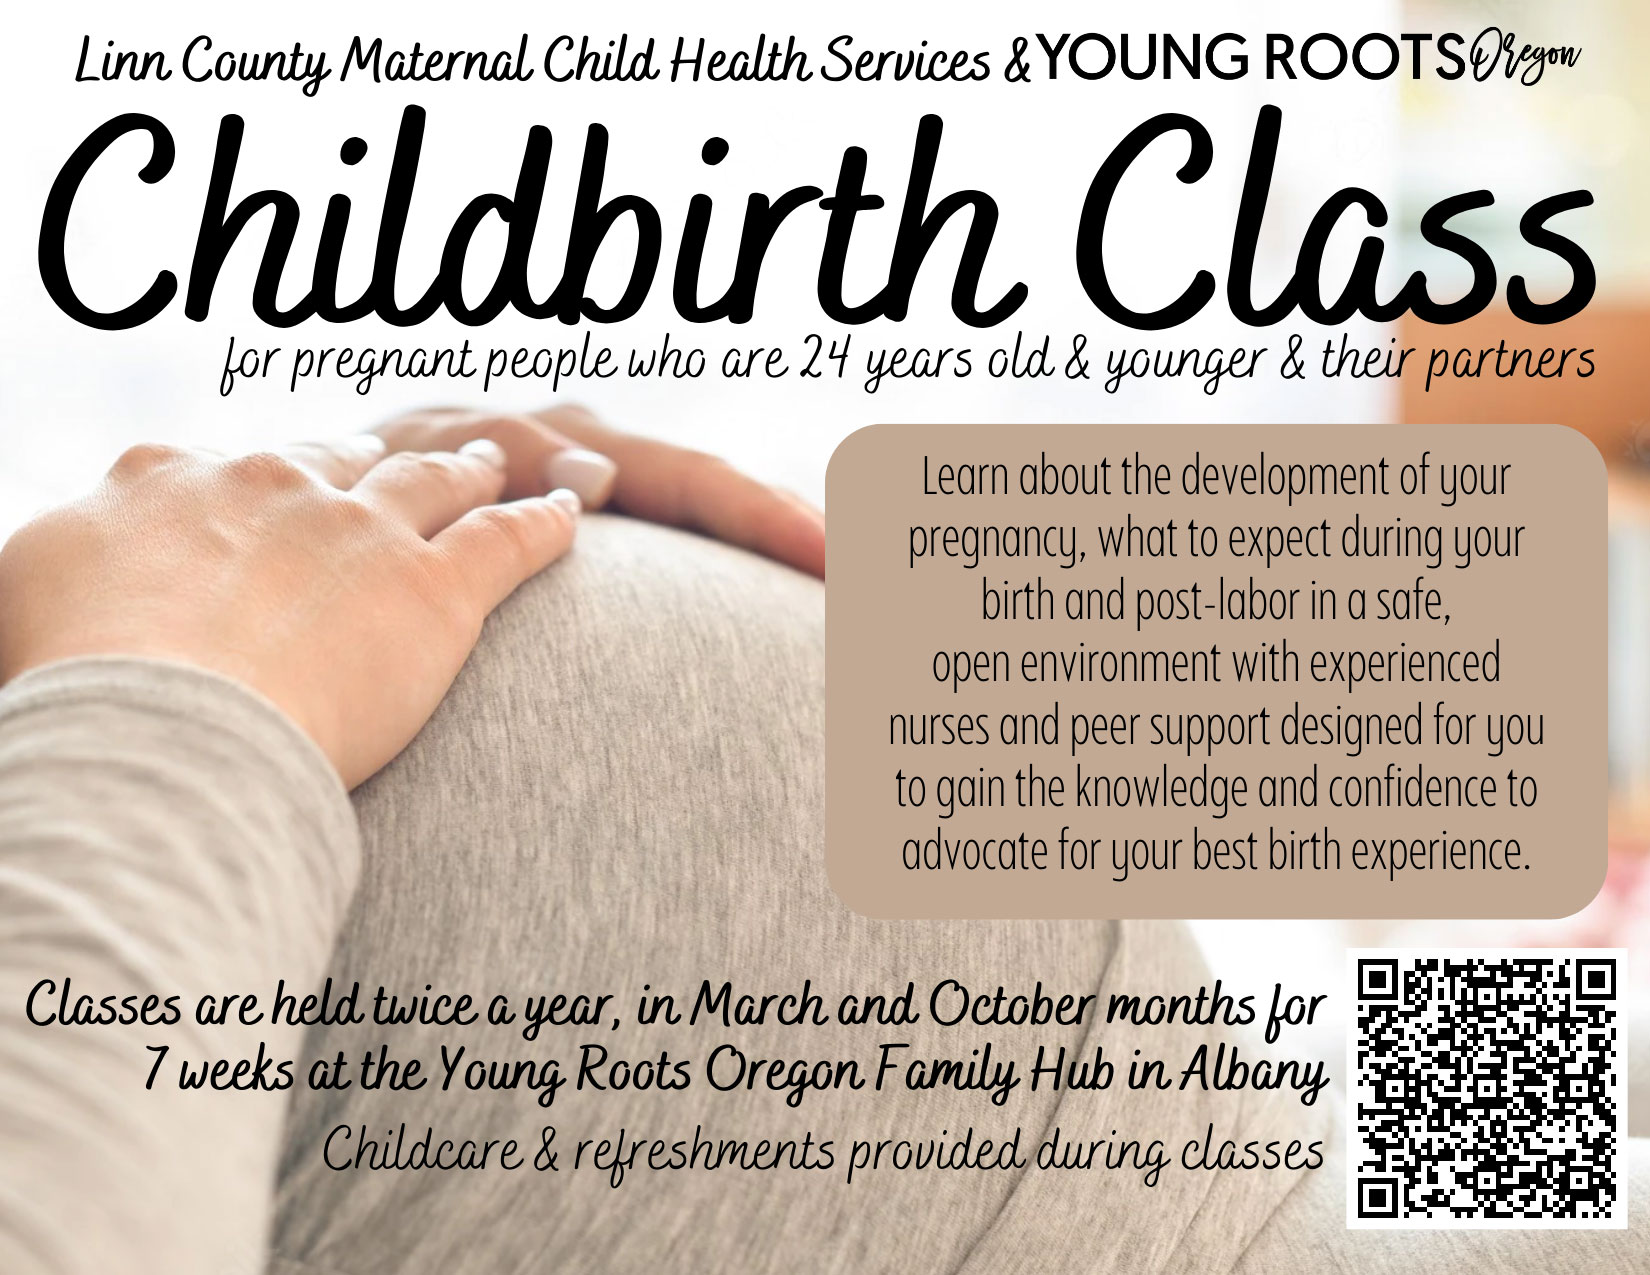 Childbirth Class registration is open year around to make it easier for you to get connected on your pregnancy journey. After you register, a YRO representative will reach out to you prior to classes beginning in April and October months.